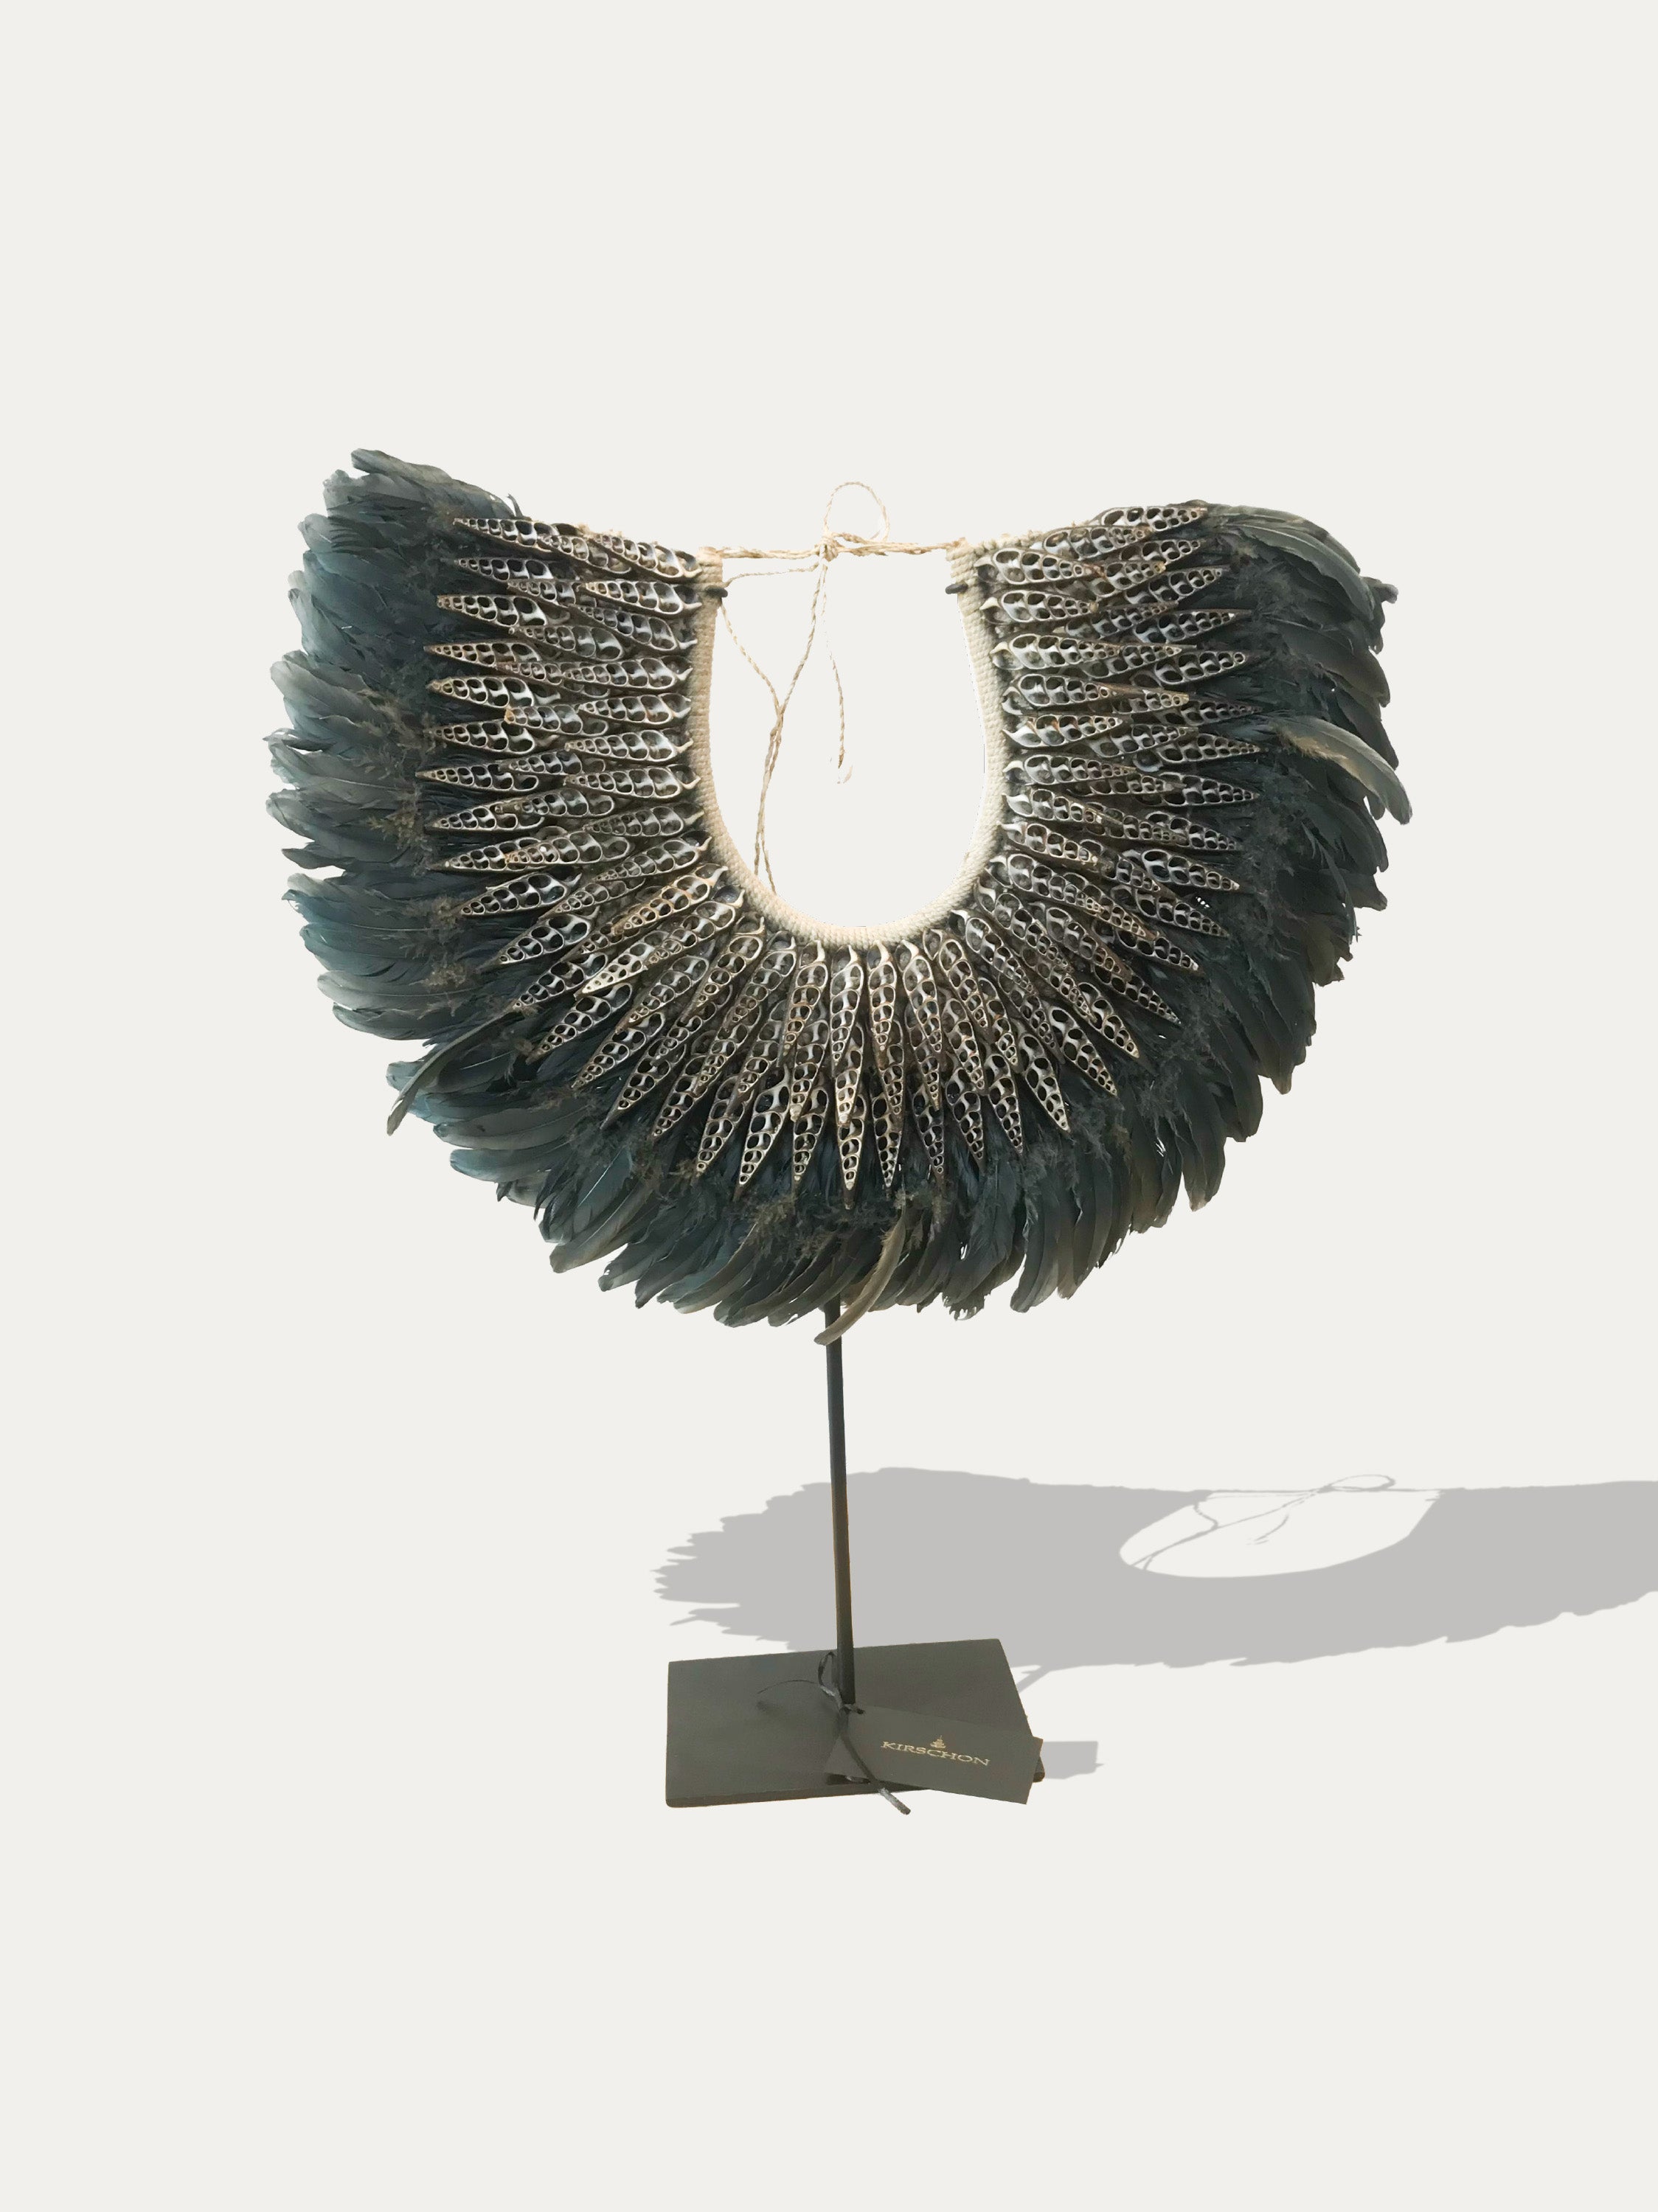 Spiral shell and feather necklace from Papua - Asian Art from Kirschon